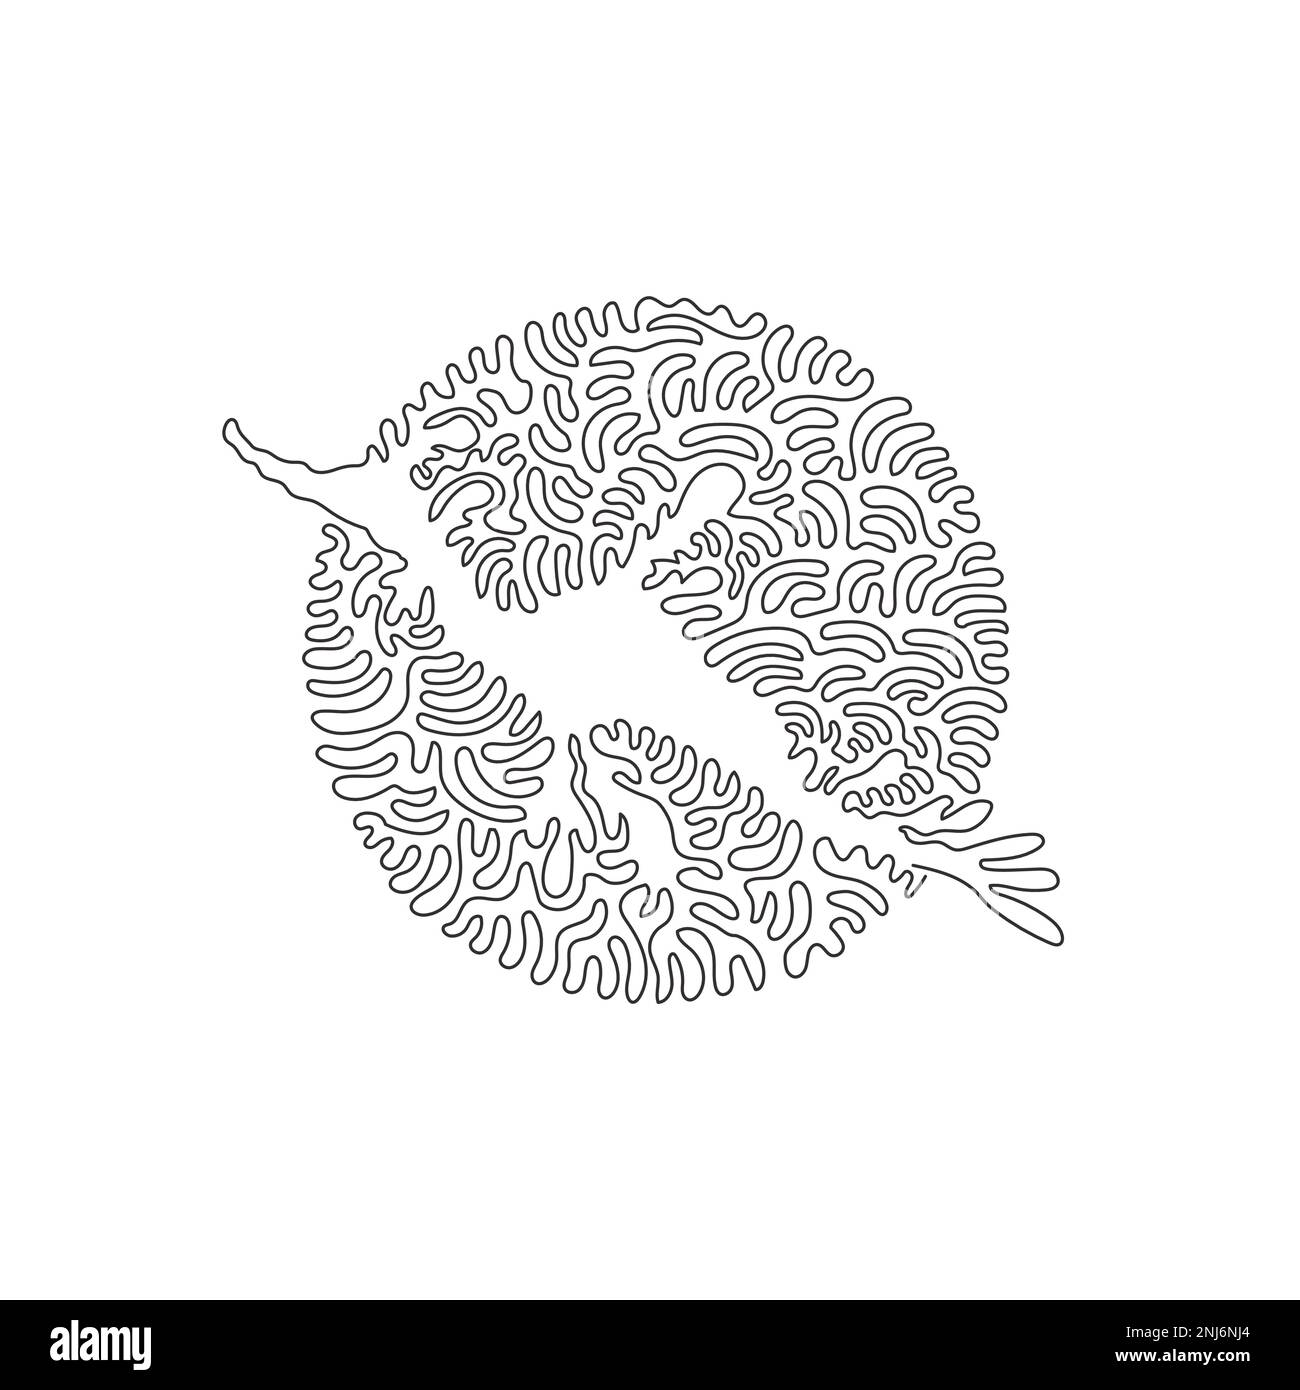 Continuous curve one line drawing of pretty seadragon abstract art in circle. Single line editable stroke vector illustration of marine creature Stock Vector